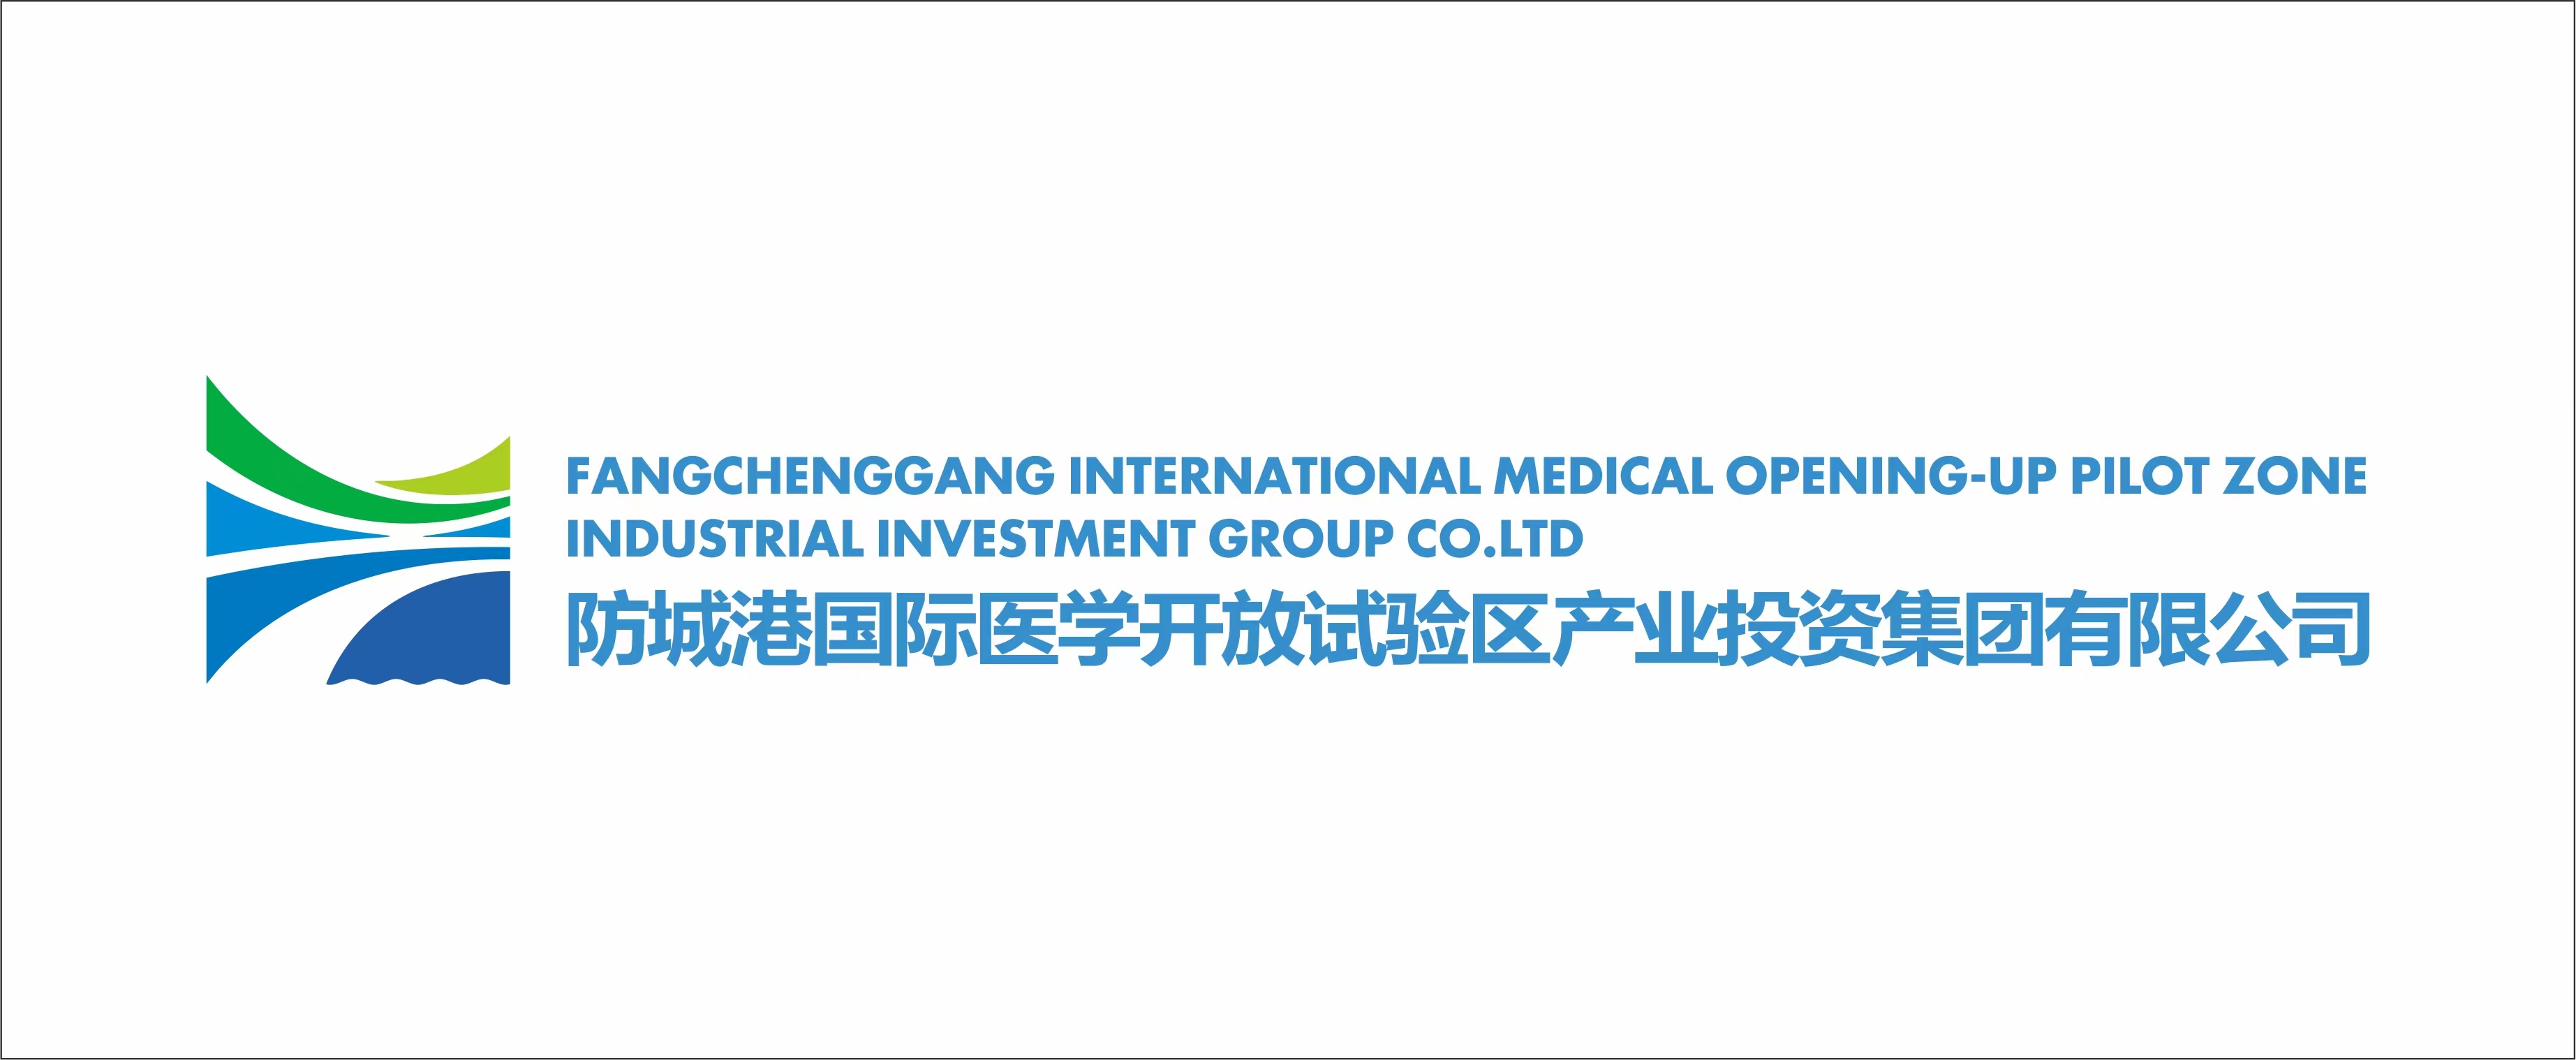 Fangchenggang International Medical Opening-up Pilot Zone Industrial Investment Group